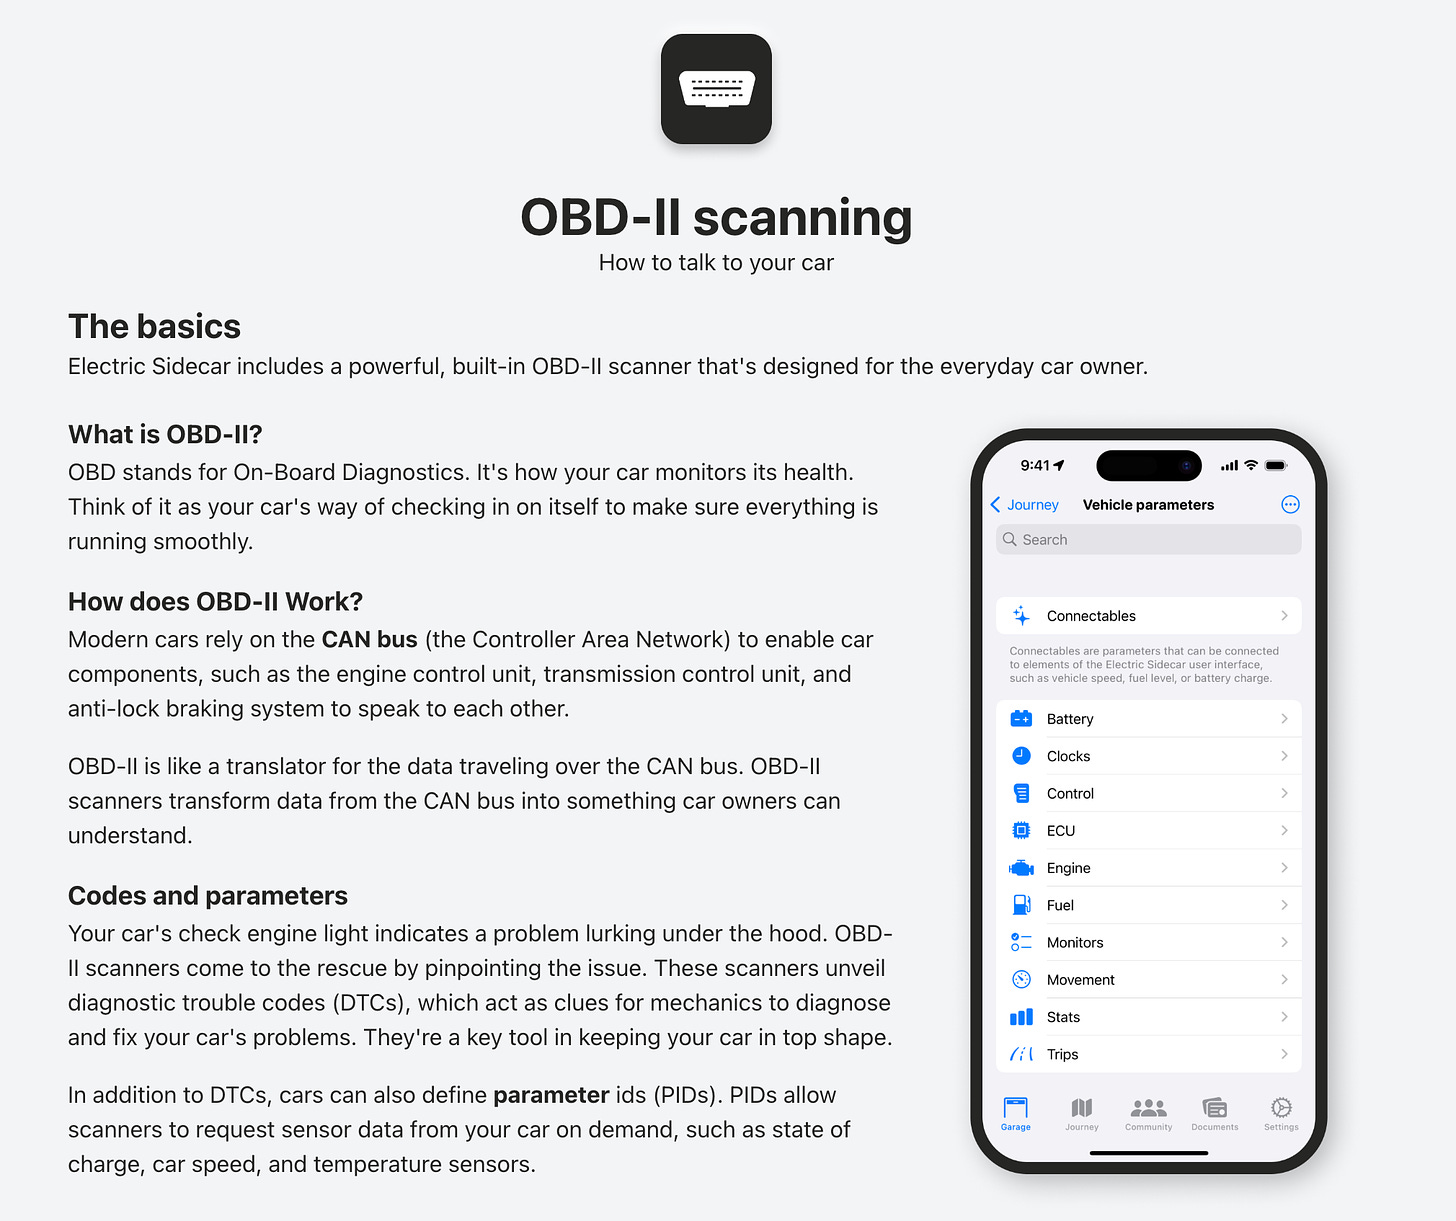 OBD-II scanning, how to talk to your car. Screenshot of the new article